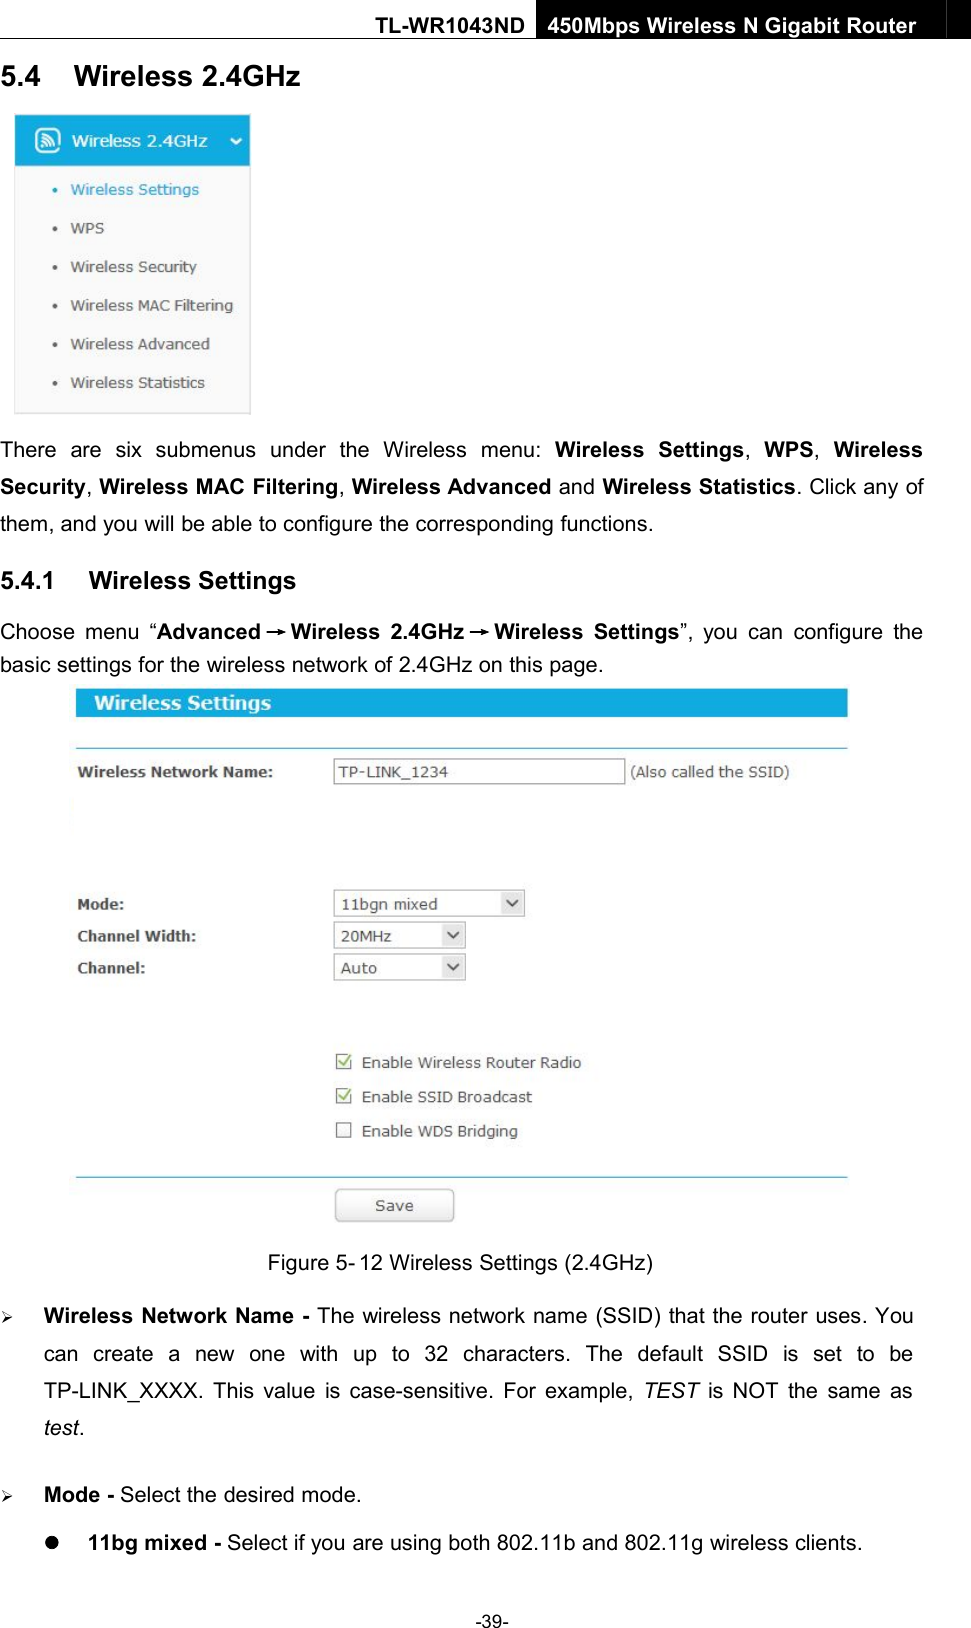 -39-TL-WR1043ND450Mbps Wireless N Gigabit Router5.4 Wireless 2.4GHzThere are six submenus under the Wireless menu: Wireless Settings,WPS,WirelessSecurity,Wireless MAC Filtering,Wireless Advanced and Wireless Statistics. Click any ofthem, and you will be able to configure the corresponding functions.5.4.1 Wireless SettingsChoose menu “Advanced →Wireless 2.4GHz →Wireless Settings”, you can configure thebasic settings for the wireless network of 2.4GHz on this page.Figure 5- 12 Wireless Settings (2.4GHz)Wireless Network Name - The wireless network name (SSID) that the router uses. Youcan create a new one with up to 32 characters. The default SSID is set to beTP-LINK_XXXX. This value is case-sensitive. For example, TEST is NOT the same astest.Mode - Select the desired mode.11bg mixed - Select if you are using both 802.11b and 802.11g wireless clients.